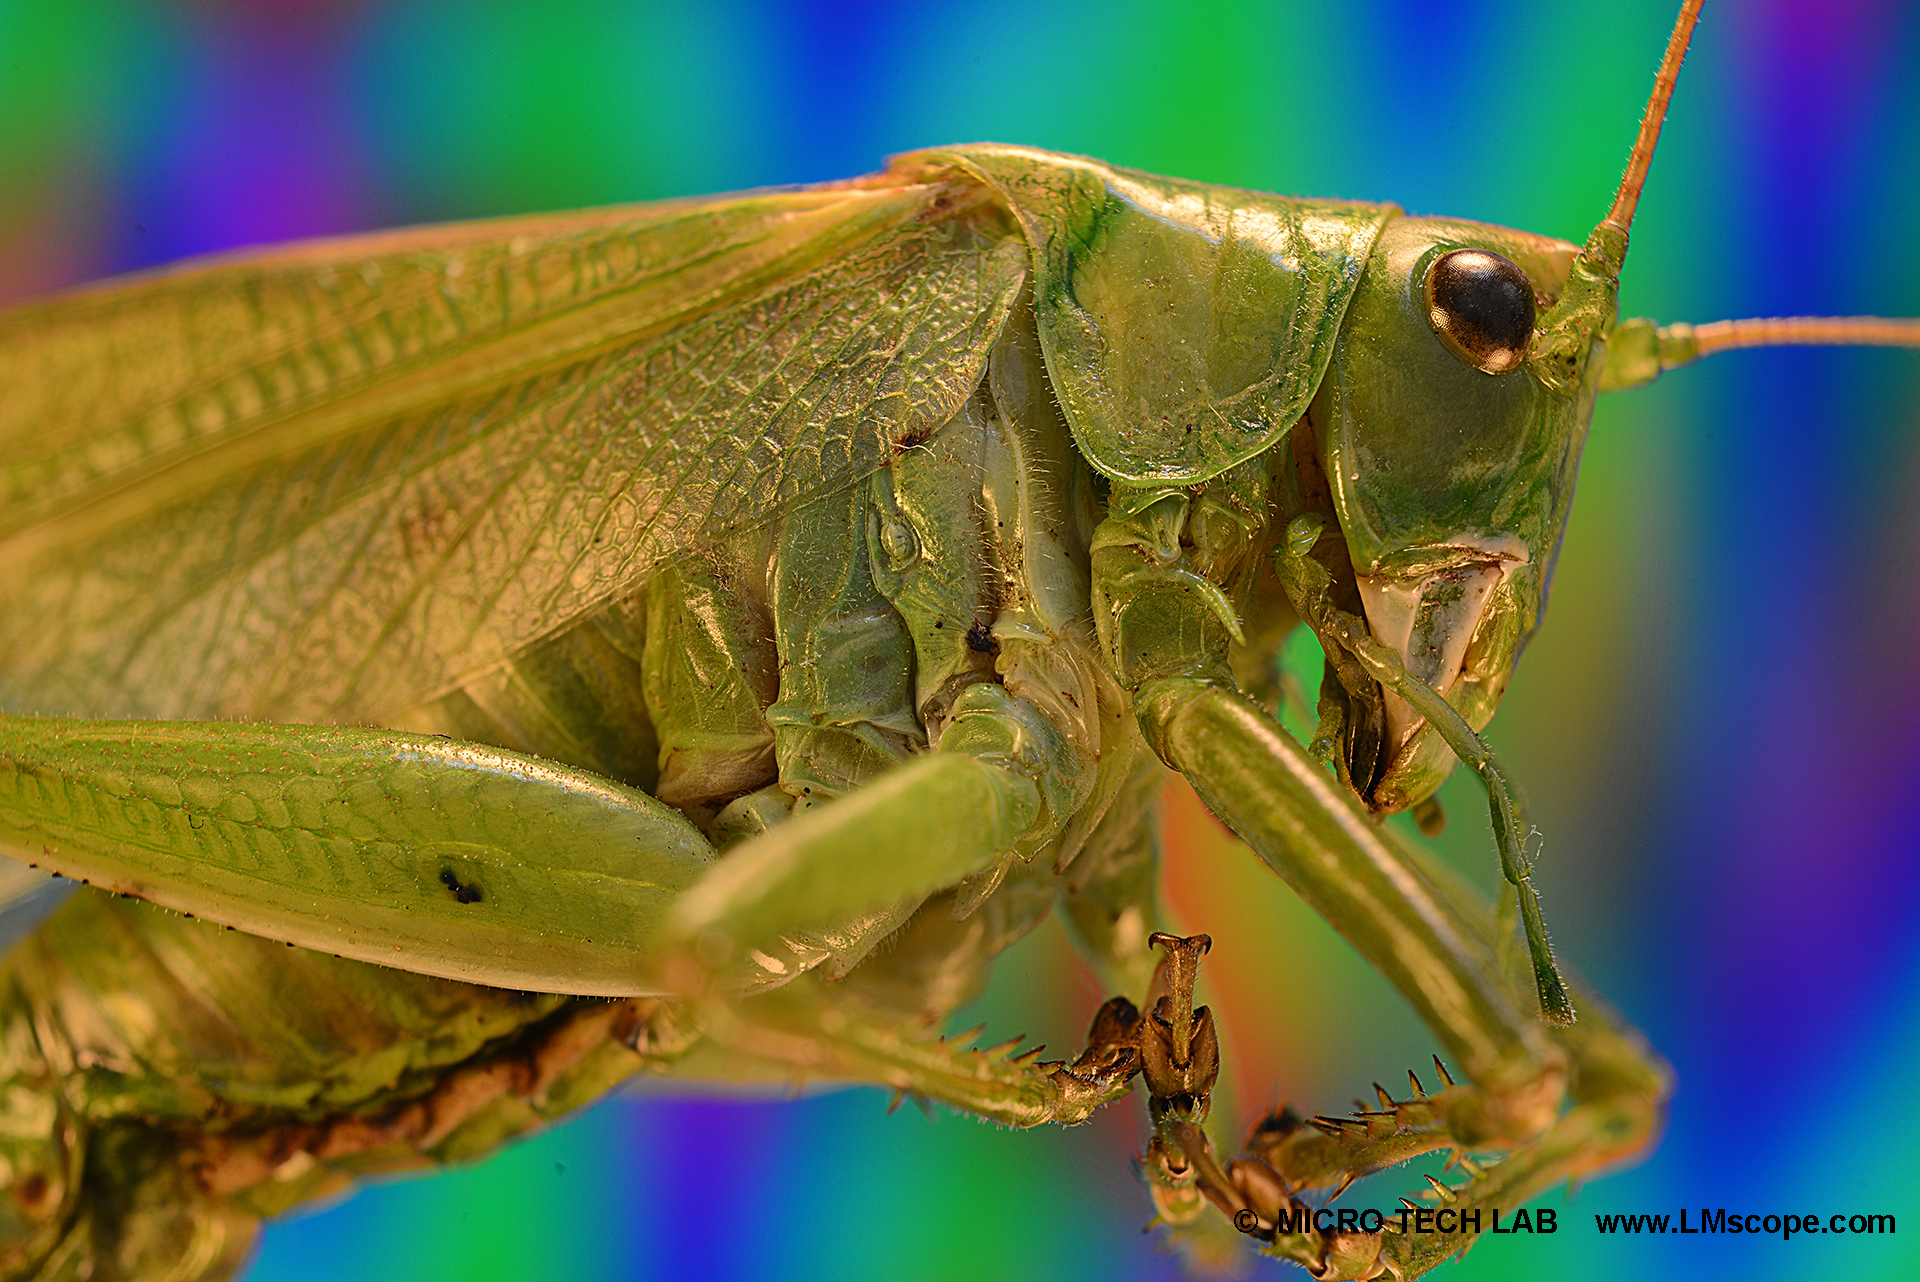 Nature photography with the LM macroscope: Grasshopper against a colorful background